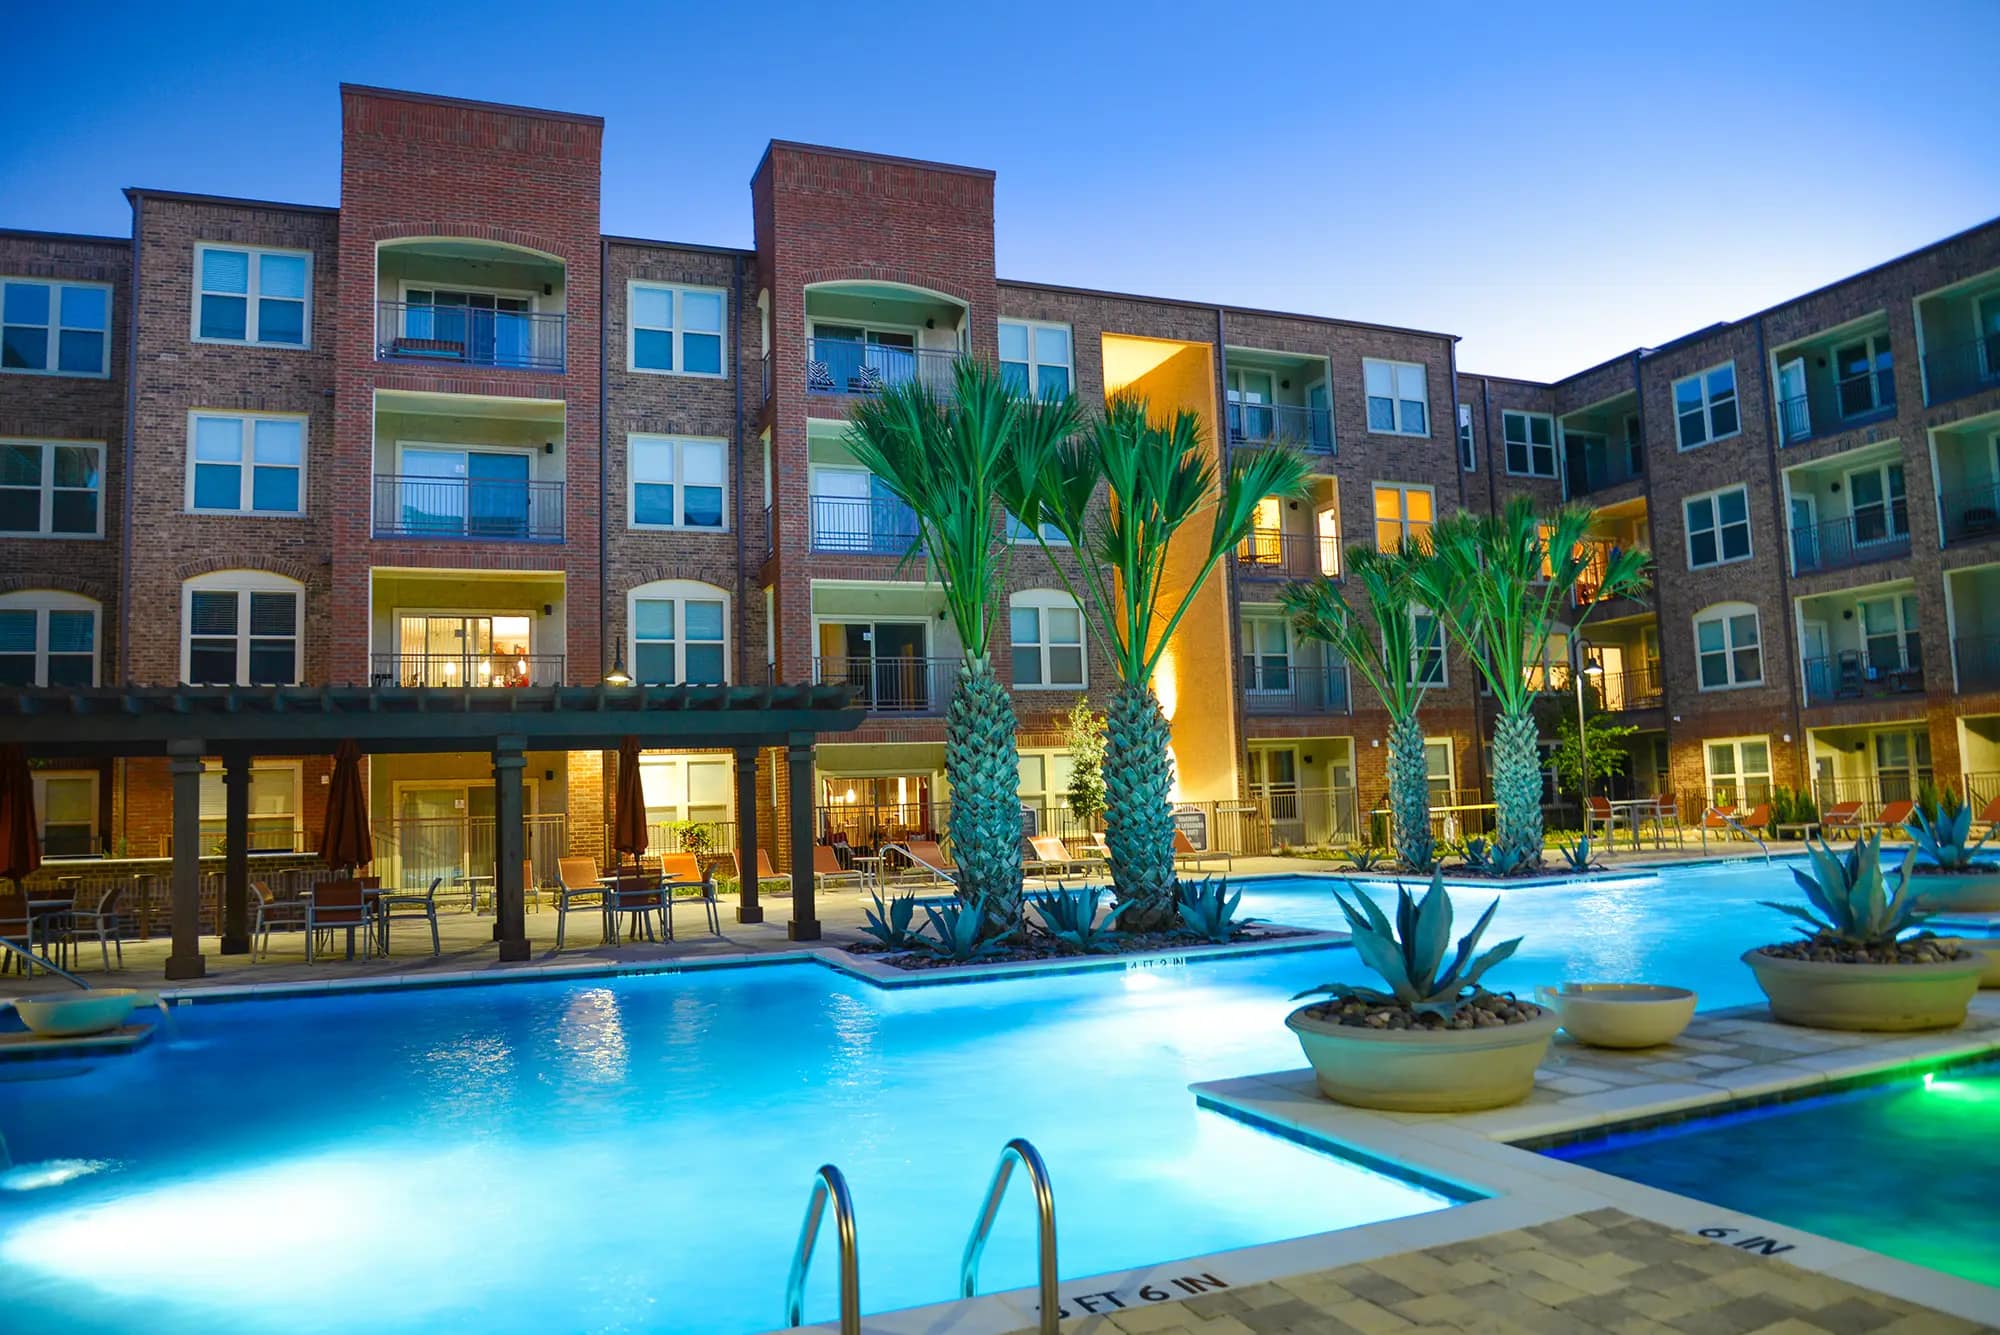 Wide view of swimming pool with water features, palm trees, shaded cabana, lounge seating and apartment balconies in the background.